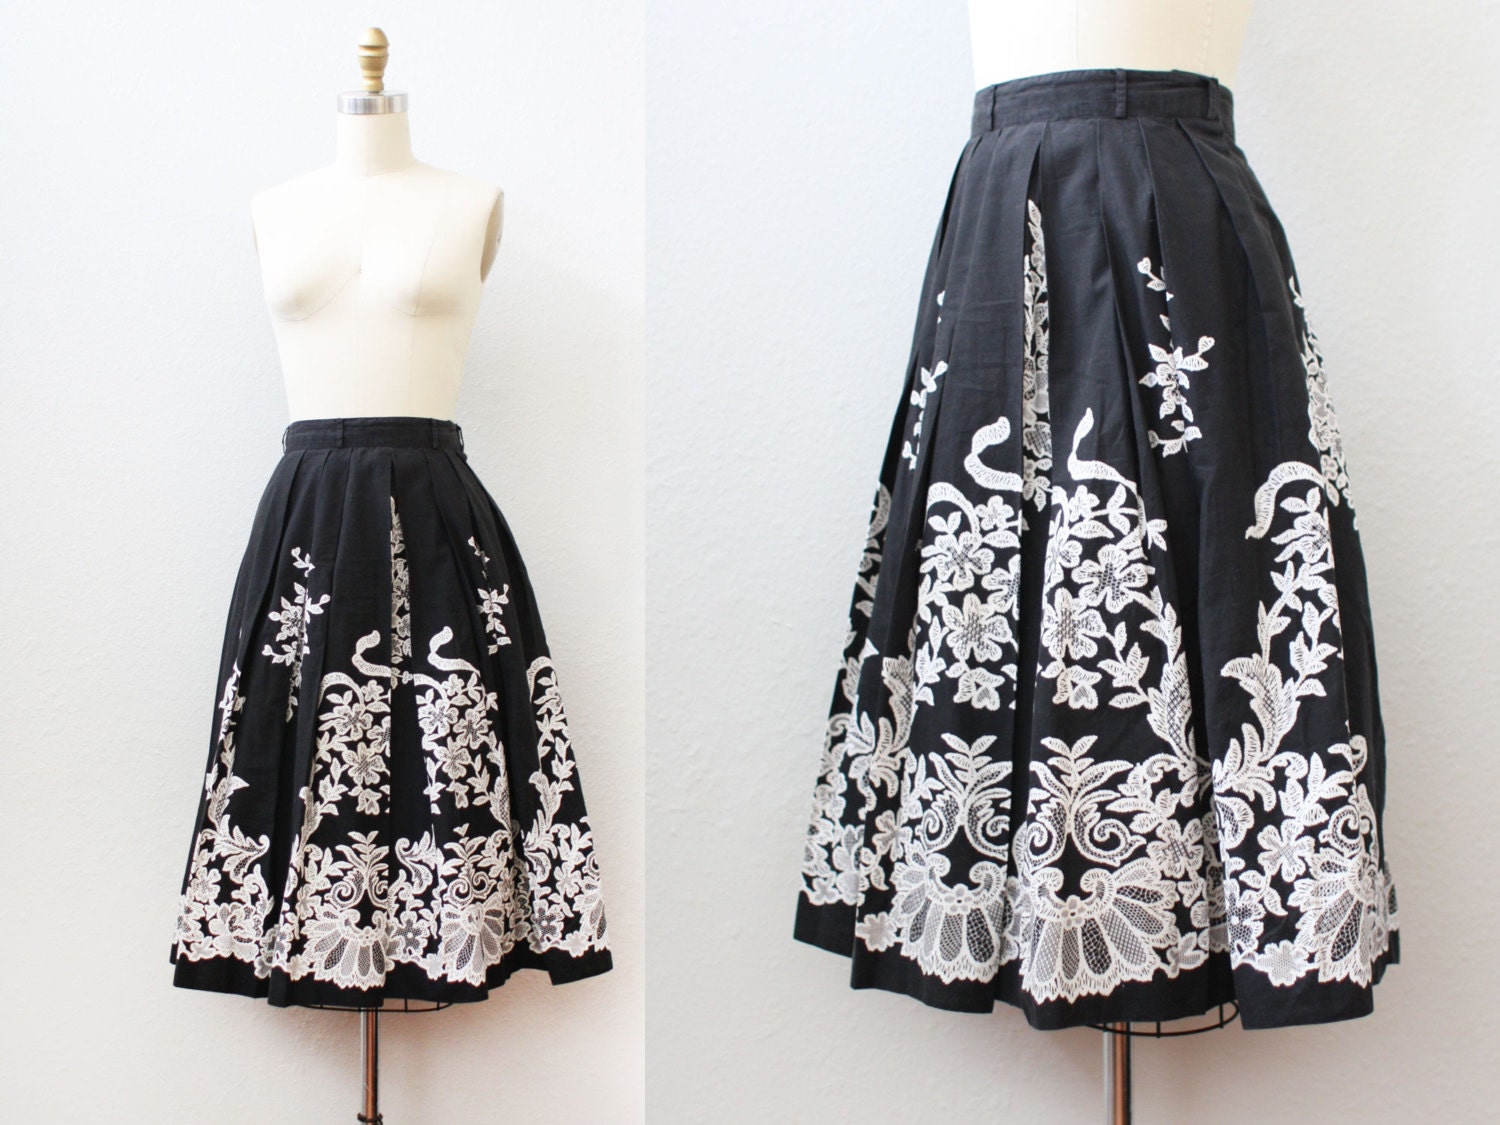 1950s skirt / LACE PRINT / Black Cotton Pleated by LantanaVintage